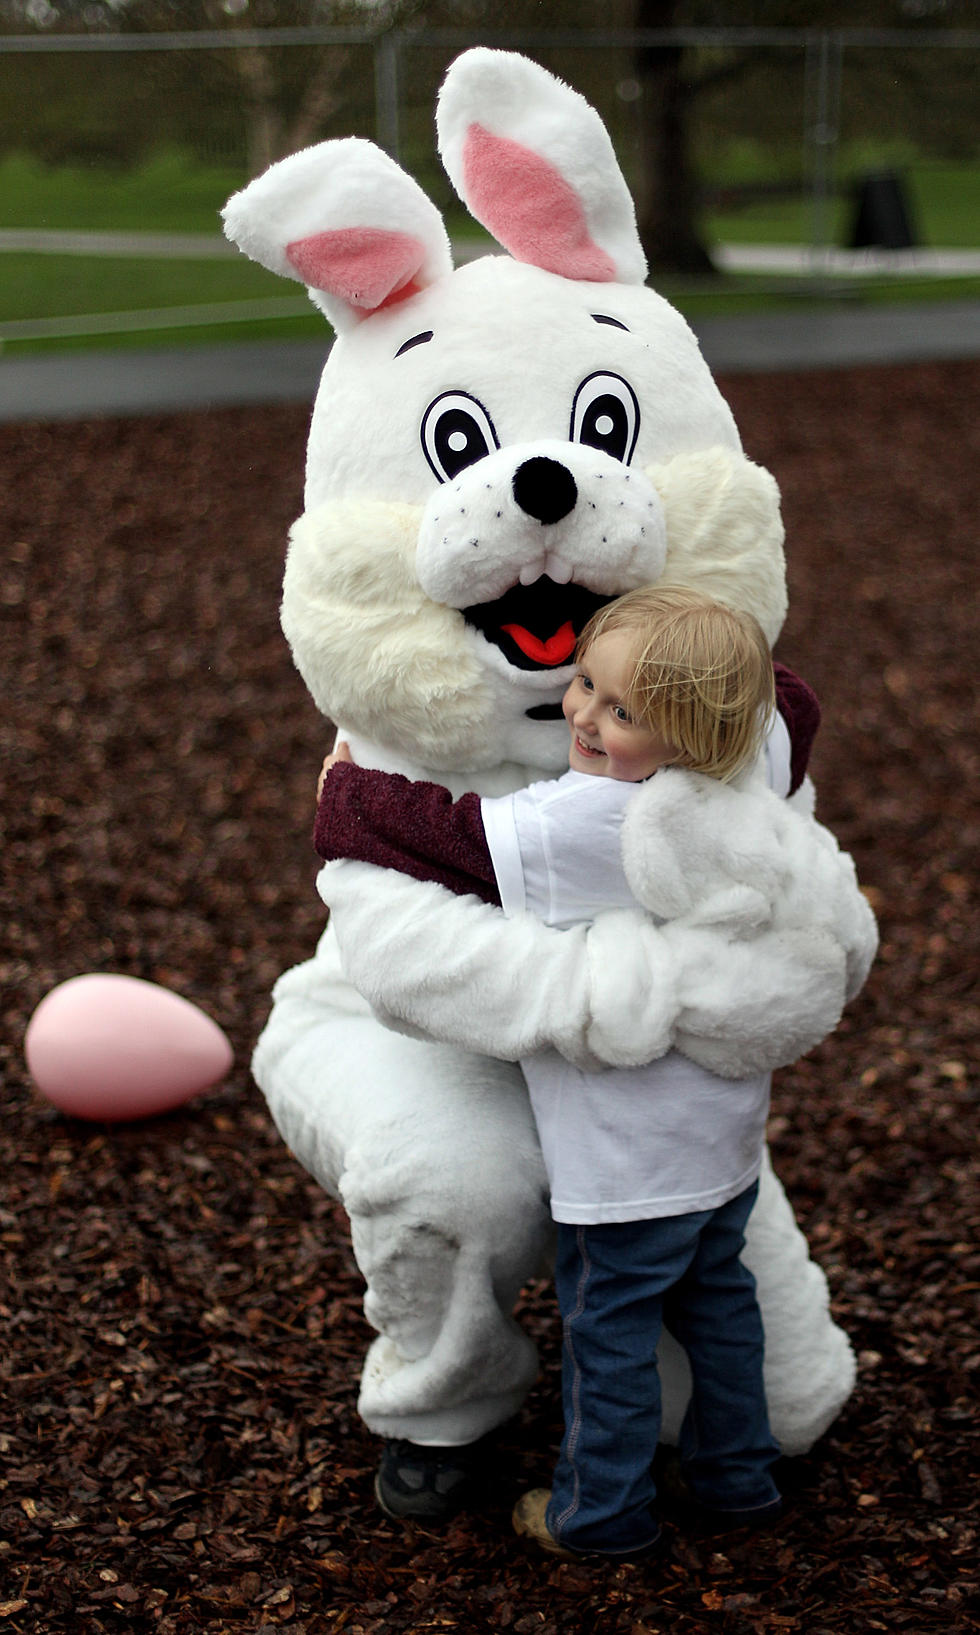 Easter Bunny at Kennedy Mall this Weekend